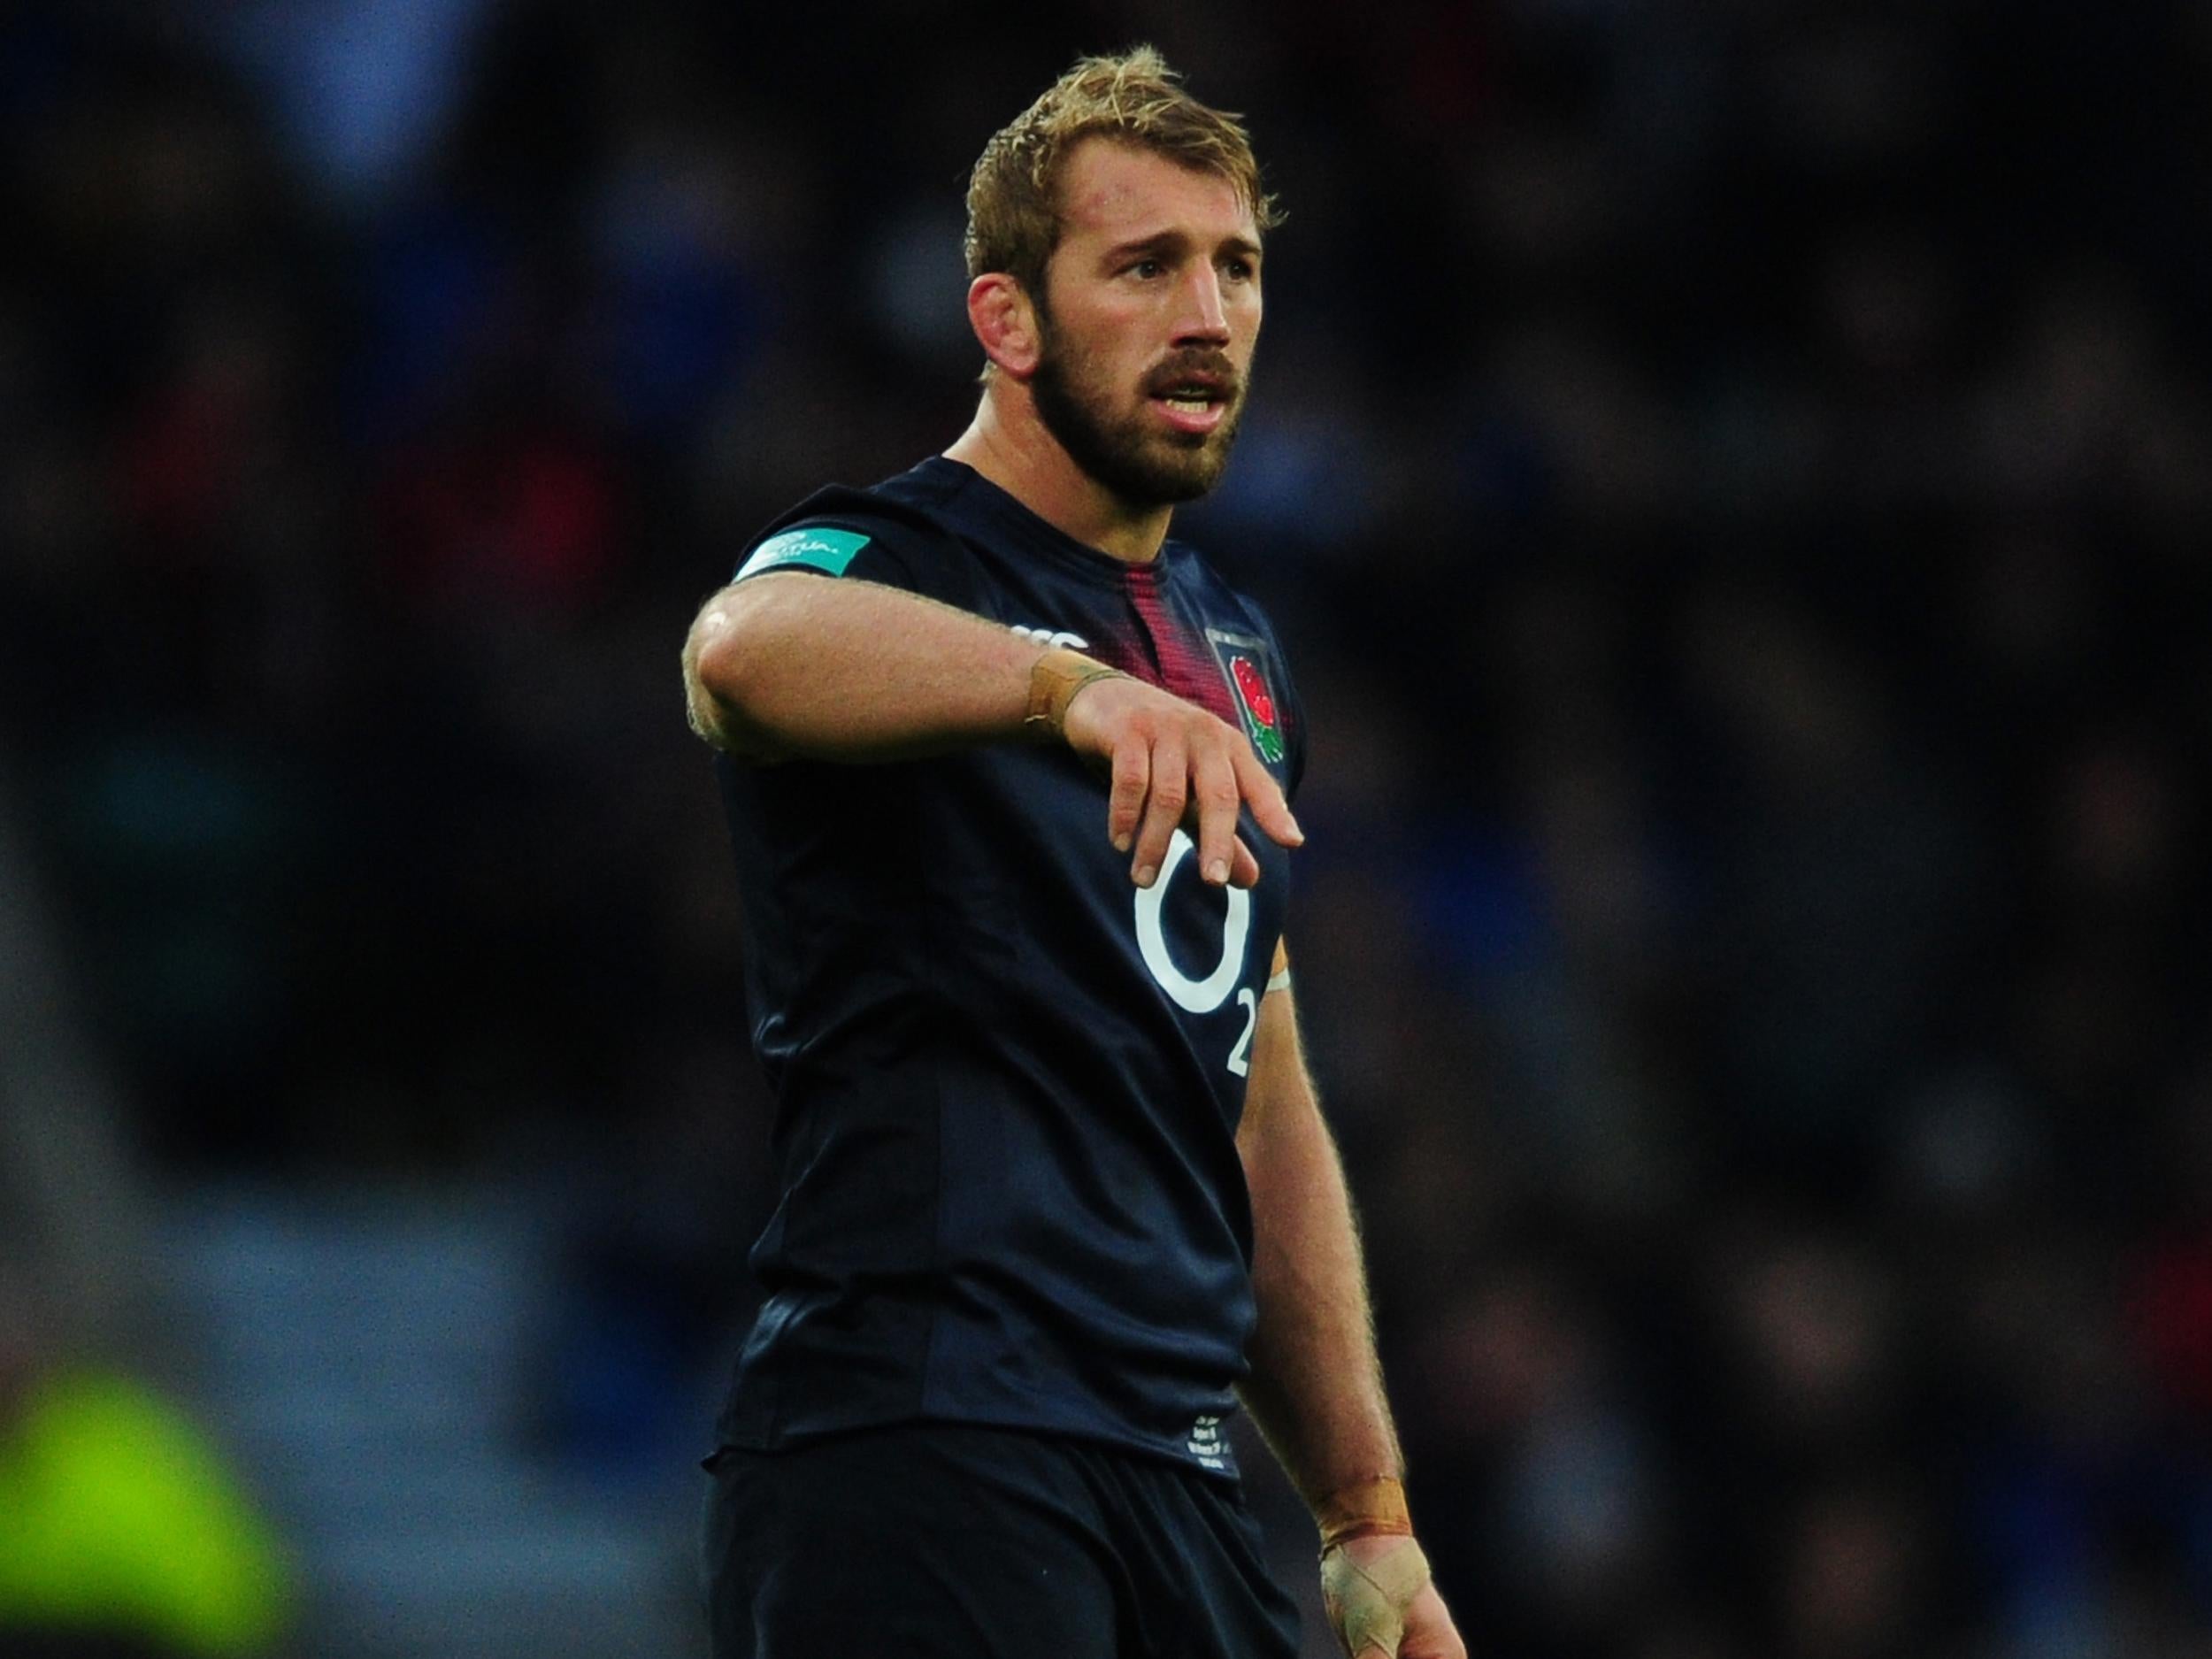 Robshaw will need shoulder surgery